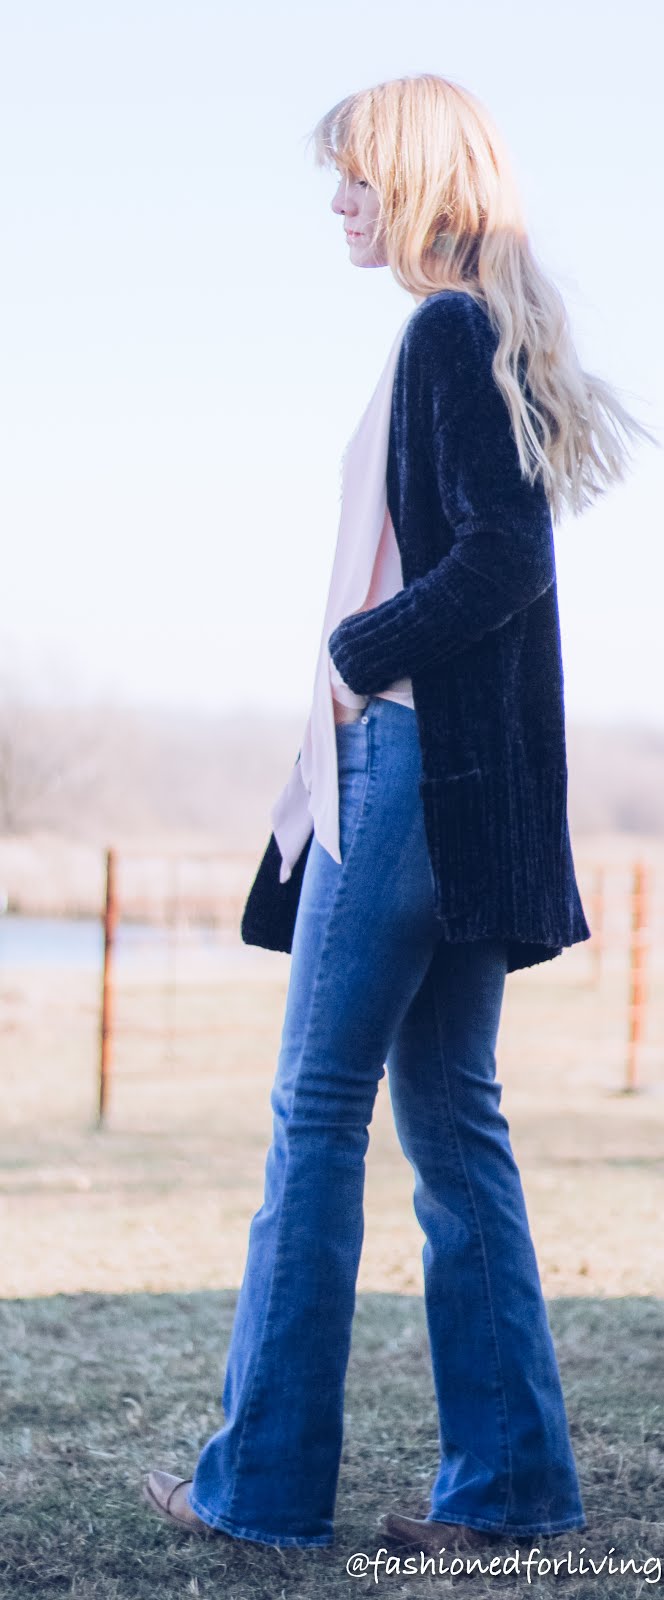 flare jeans and boots